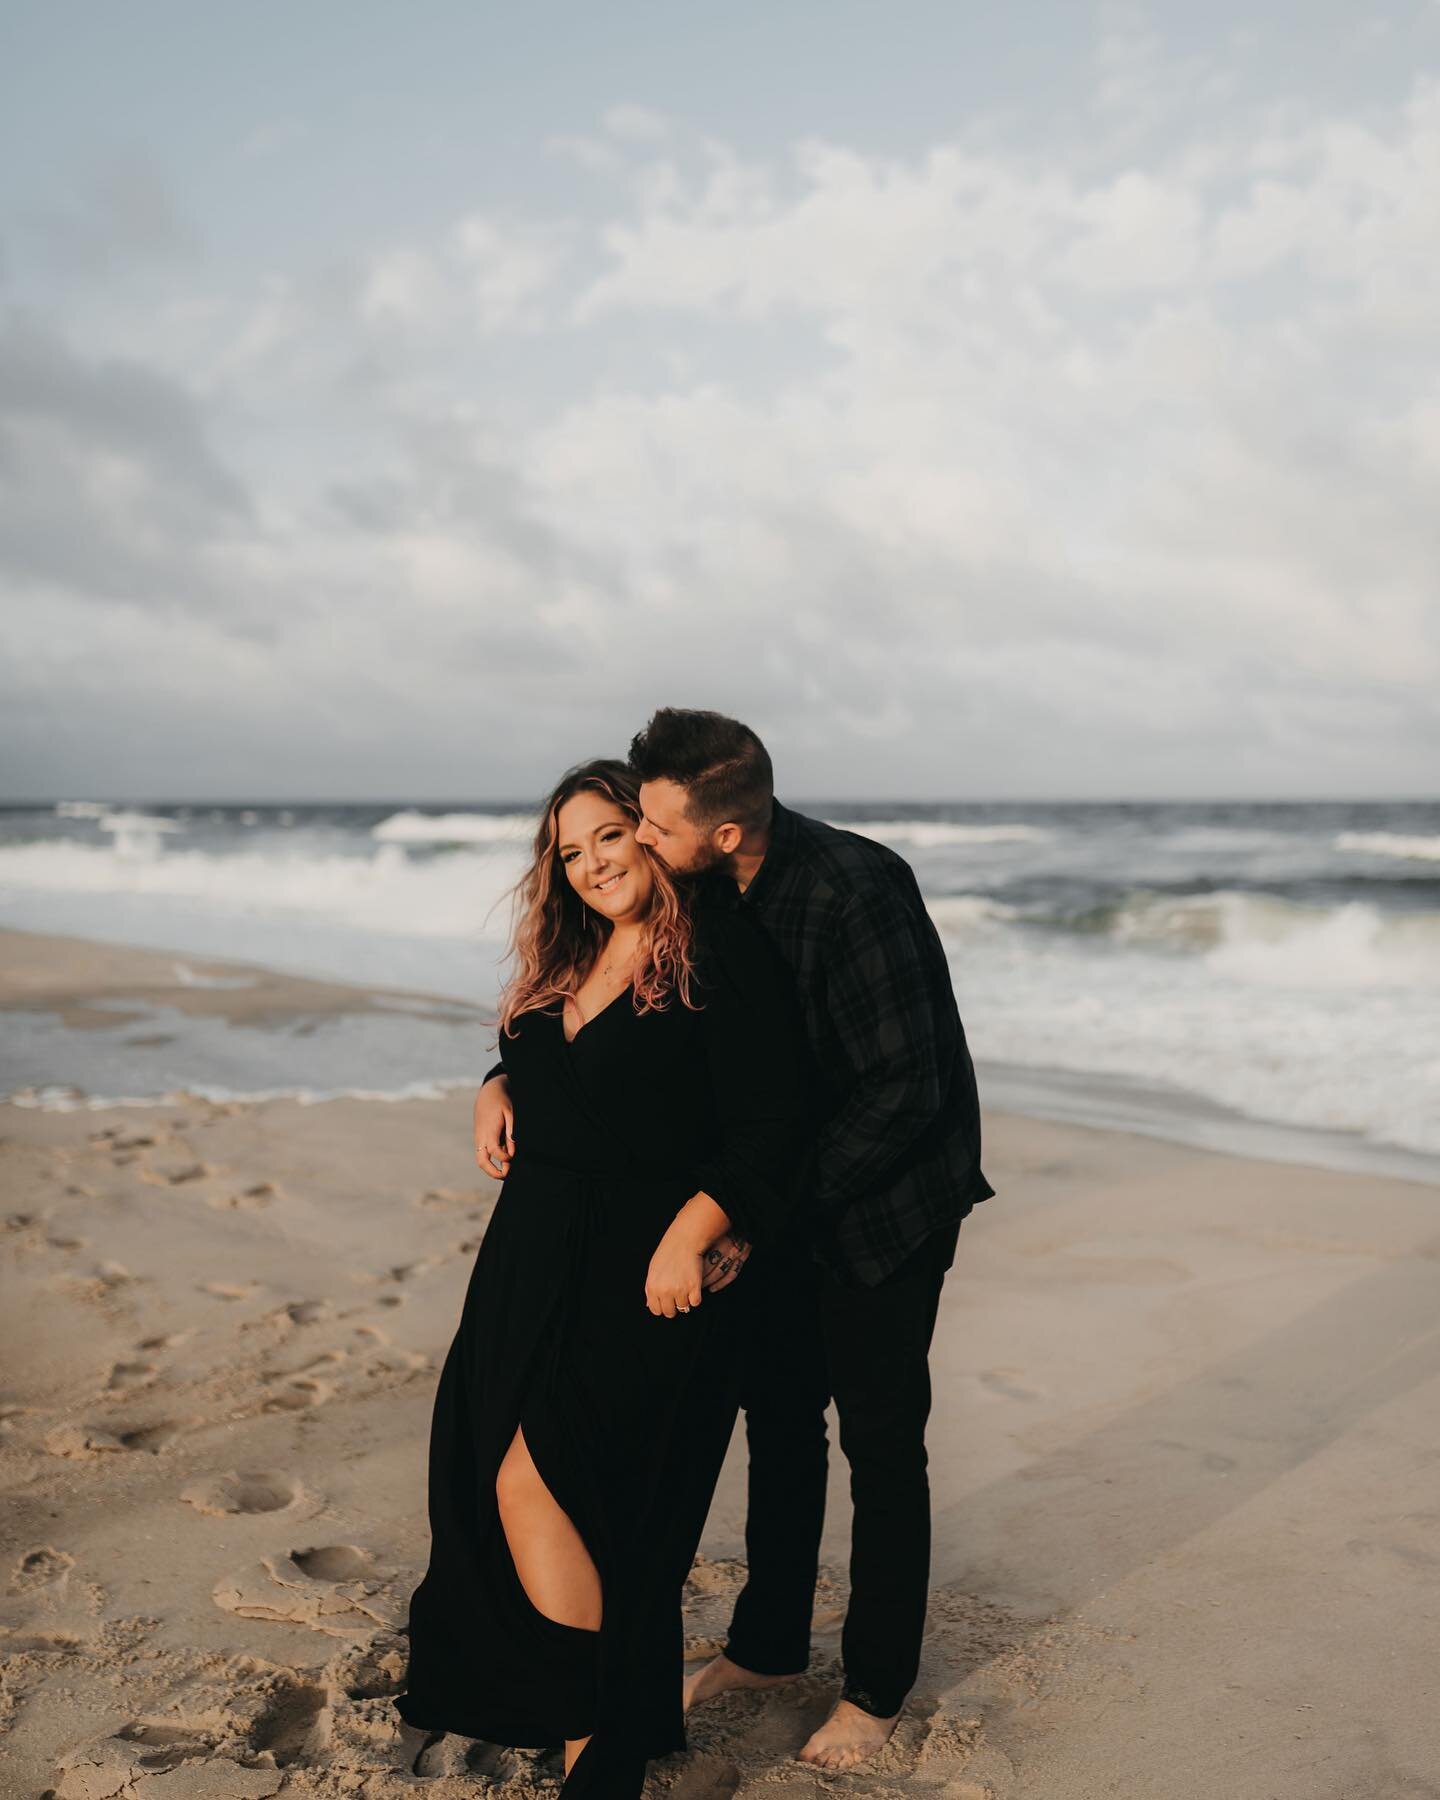 ITS WEDDING DAY FOR THESE TWO 🥳

Heading back to LBI today to get Lauren + Cole married! Woohoo!&hearts;️ 

👉🏼 Check out my last IG reel to see some behind the scenes from this #lbi #engagementsession !